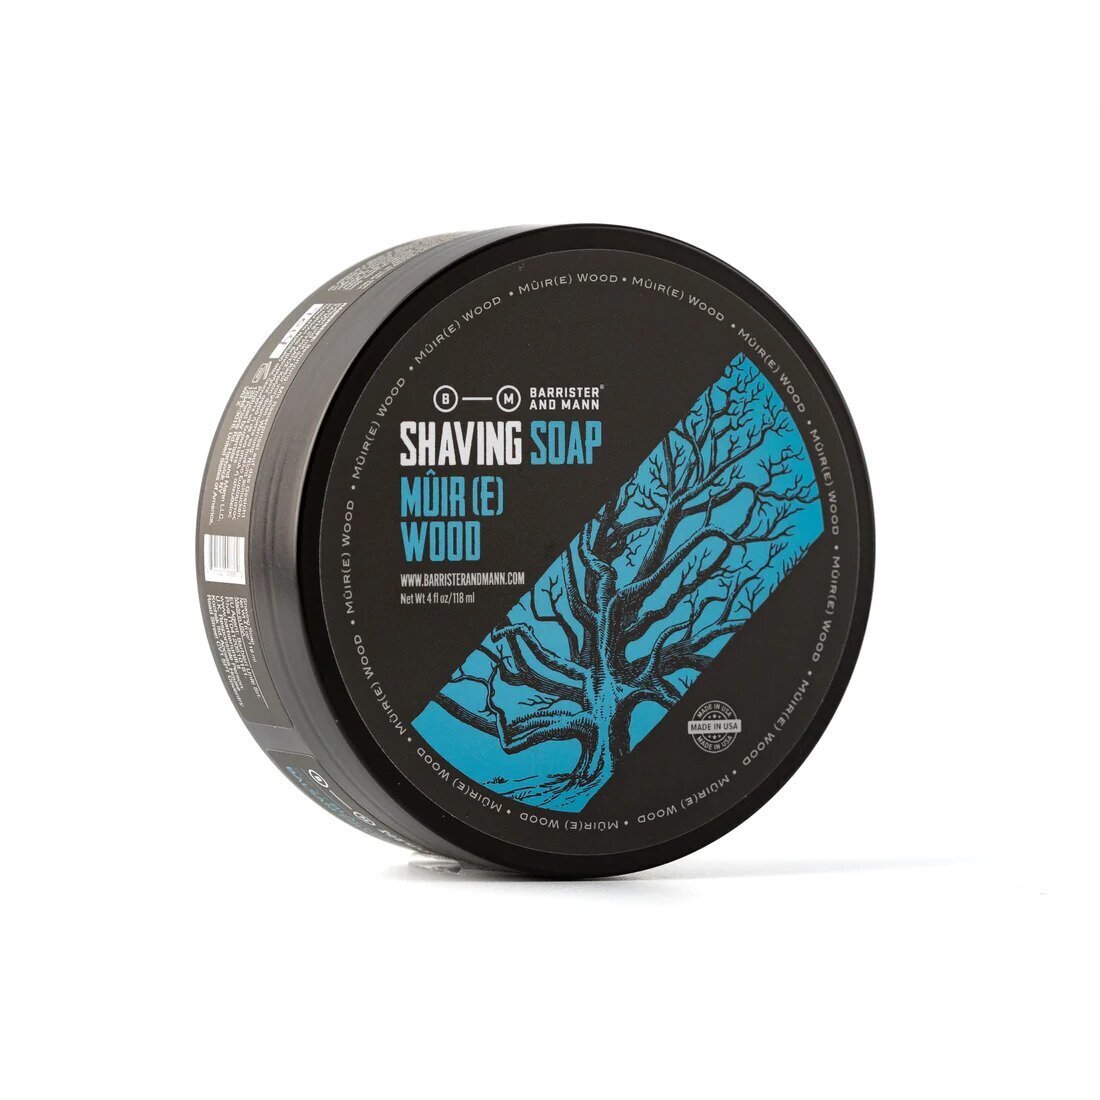 Barrister and Mann shaving soap Muire Wood 118ml 